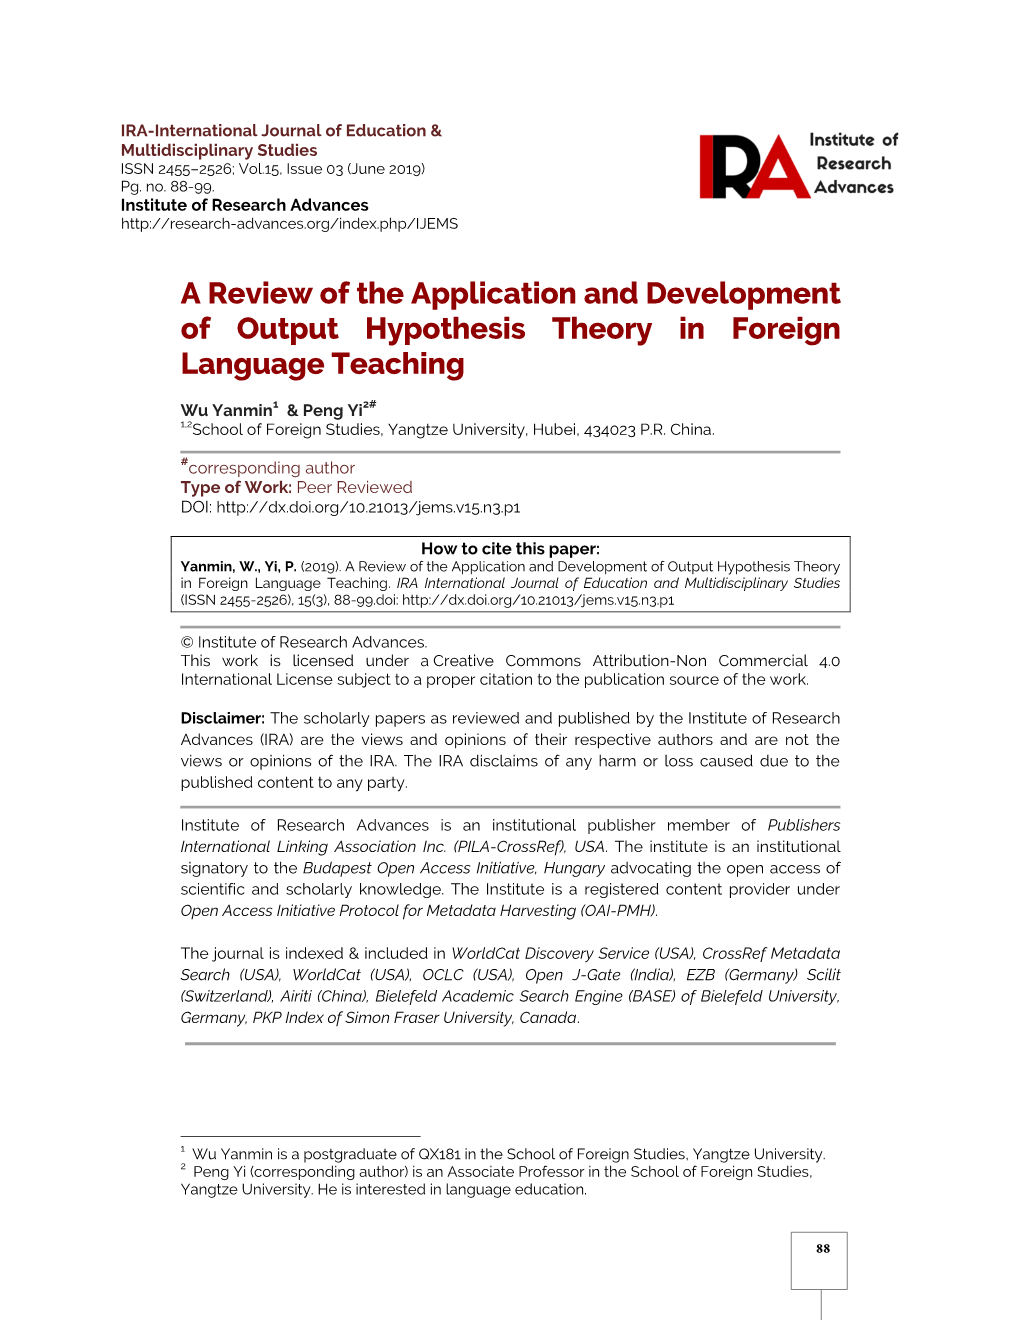 A Review of the Application and Development of Output Hypothesis Theory in Foreign Language Teaching